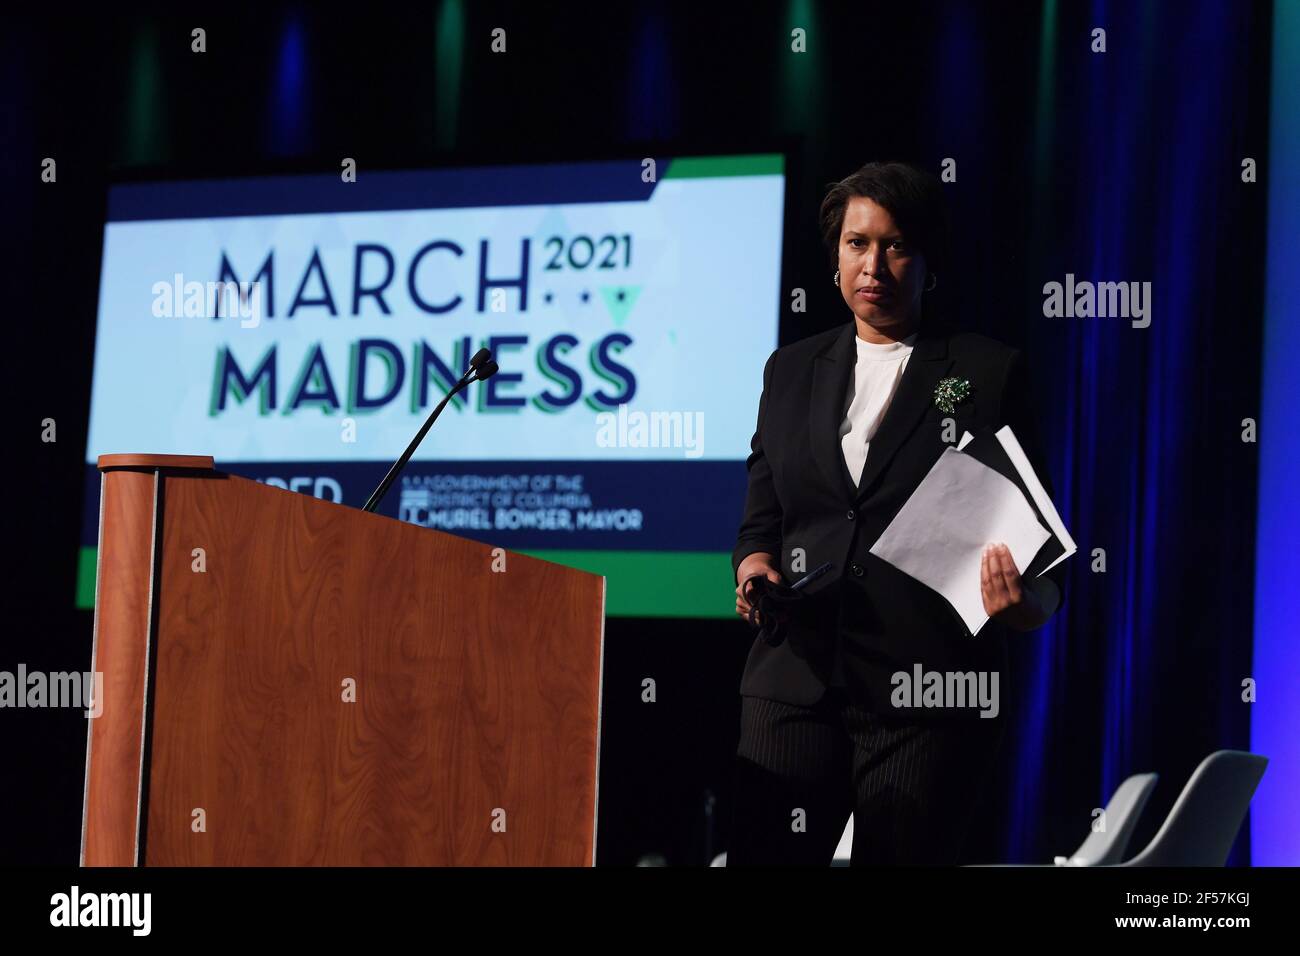 DC Mayor Muriel Bowser deliver remarks about DC HOPE: Housing, Opportunity, Prosperity and Equity during the 7th Annual March Madness today on March 24, 2021 at Walter E. Washington Convention Center in Washington DC, USA. (Photo by Lenin Nolly/Sipa USA) Stock Photo